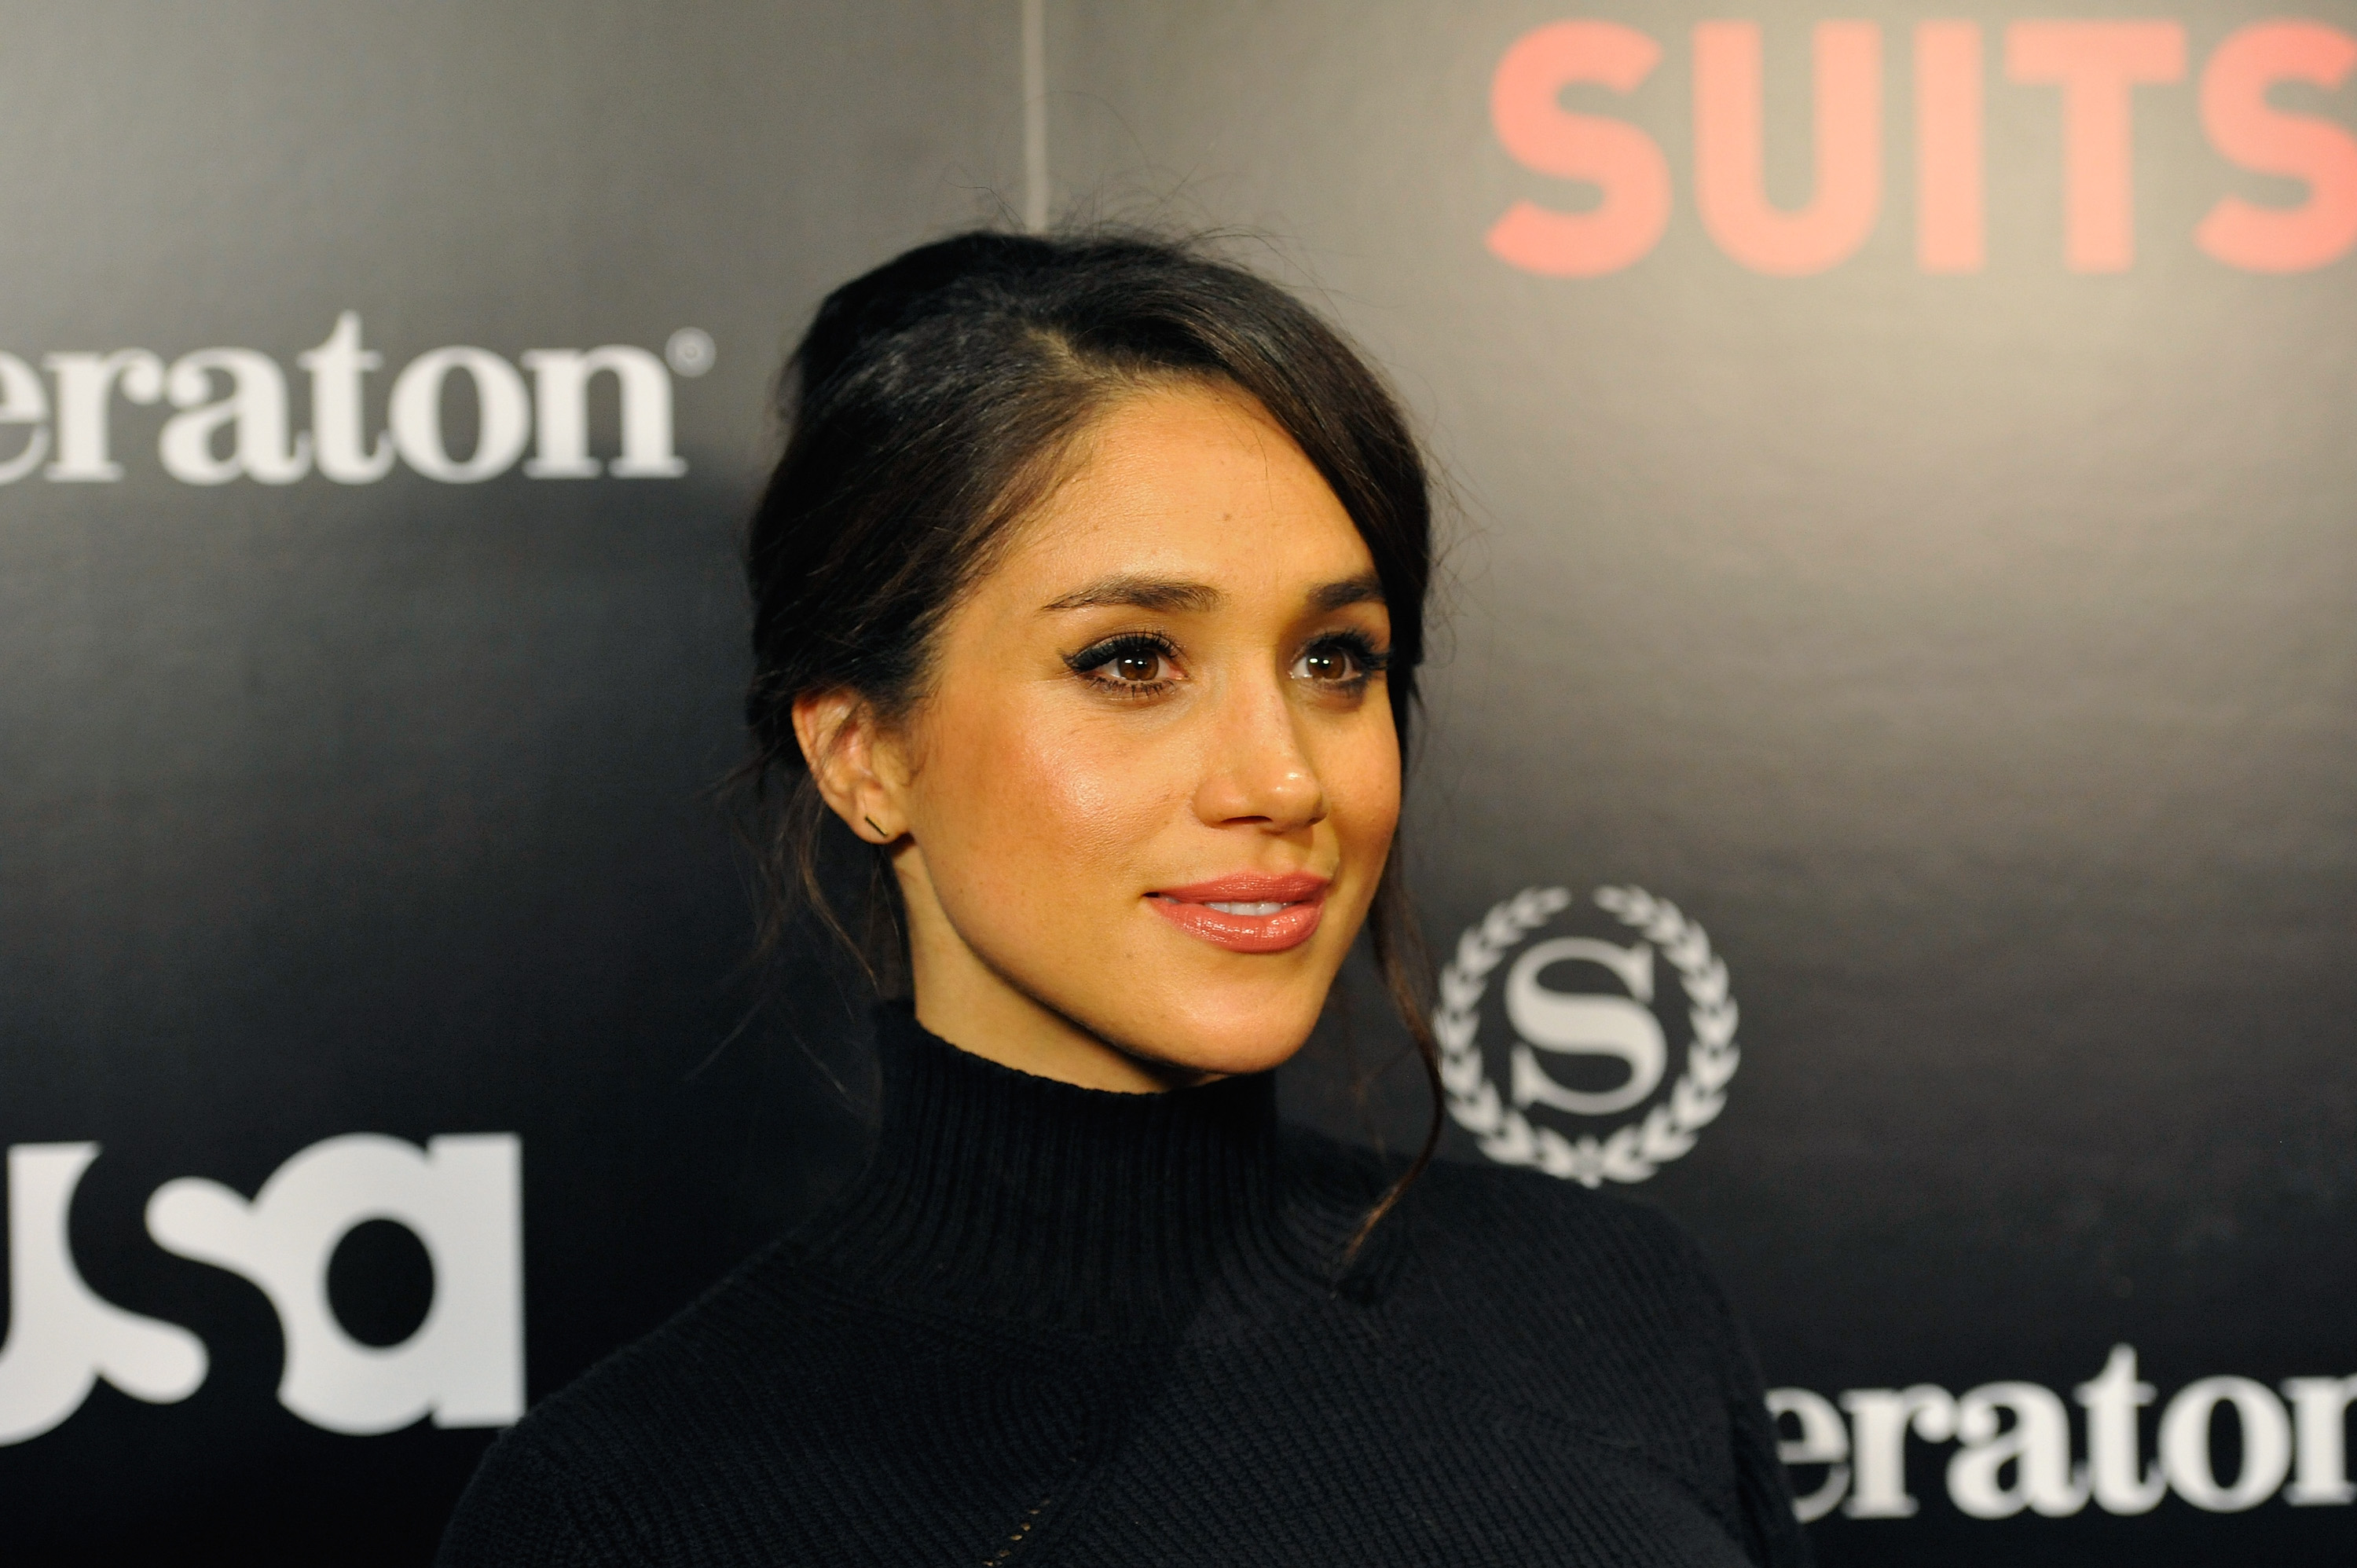 LOS ANGELES, CA - JANUARY 21:  Actress Meghan Markle attrends the premiere of USA Network's "Suits" Season Five at Sheraton Los Angeles Downtown Hotel on January 21, 2016 in Los Angeles, California.  (Photo by Michael Tullberg/Getty Images) (Michael Tullberg/Getty Images)